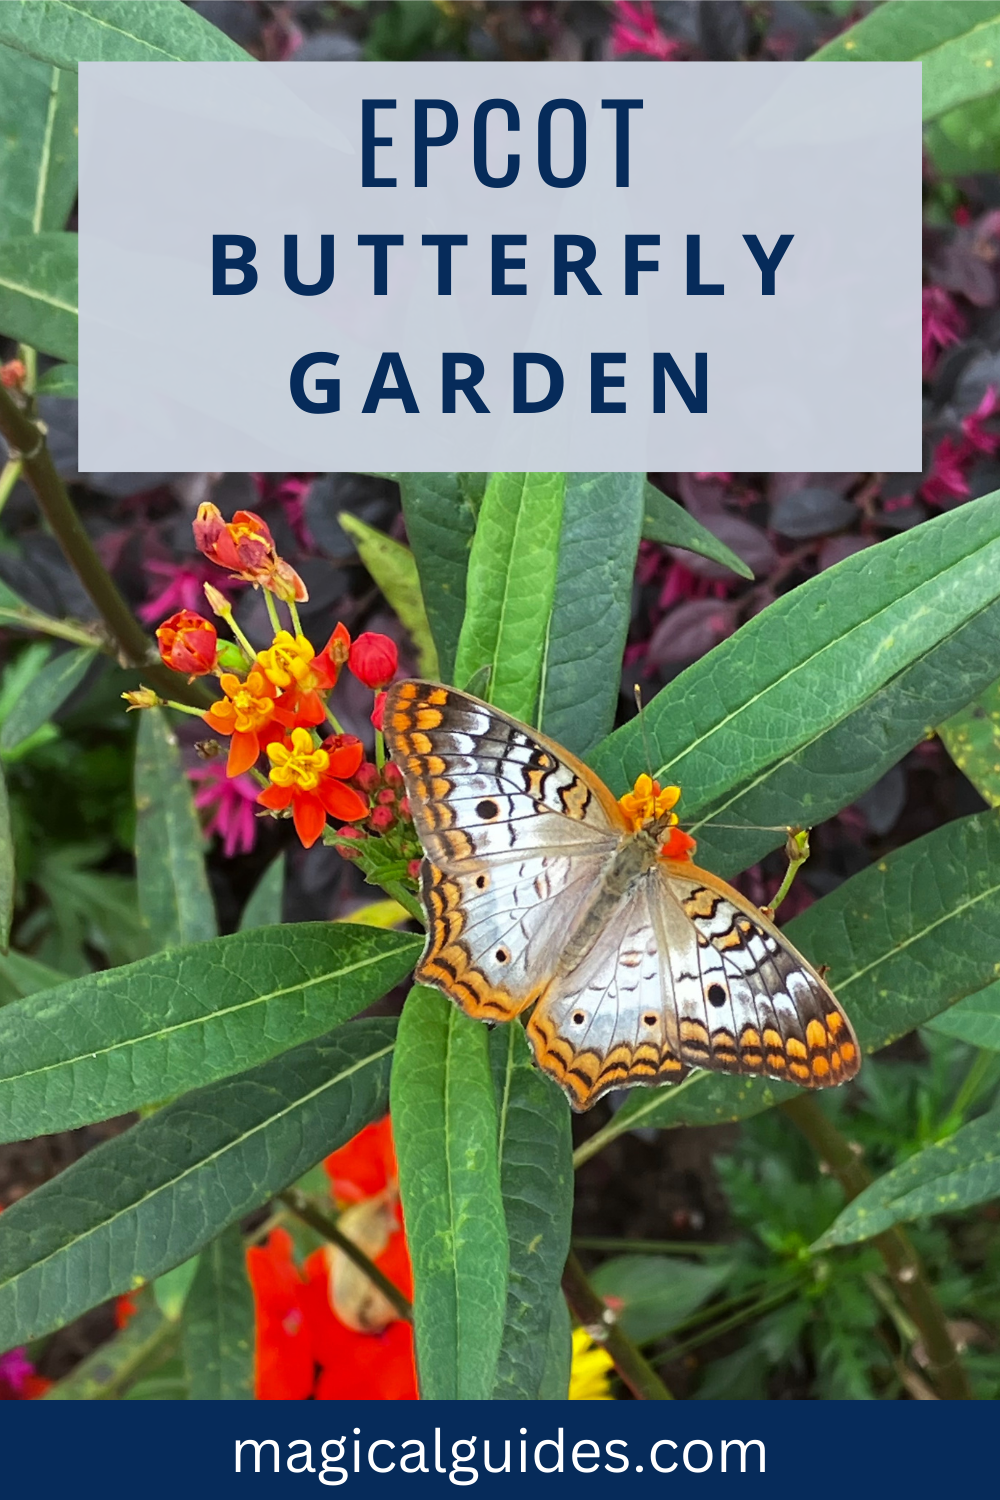 Complete guide to the EPCOT Butterfly Garden that can be found during the EPCOT Flower & Garden Festival.